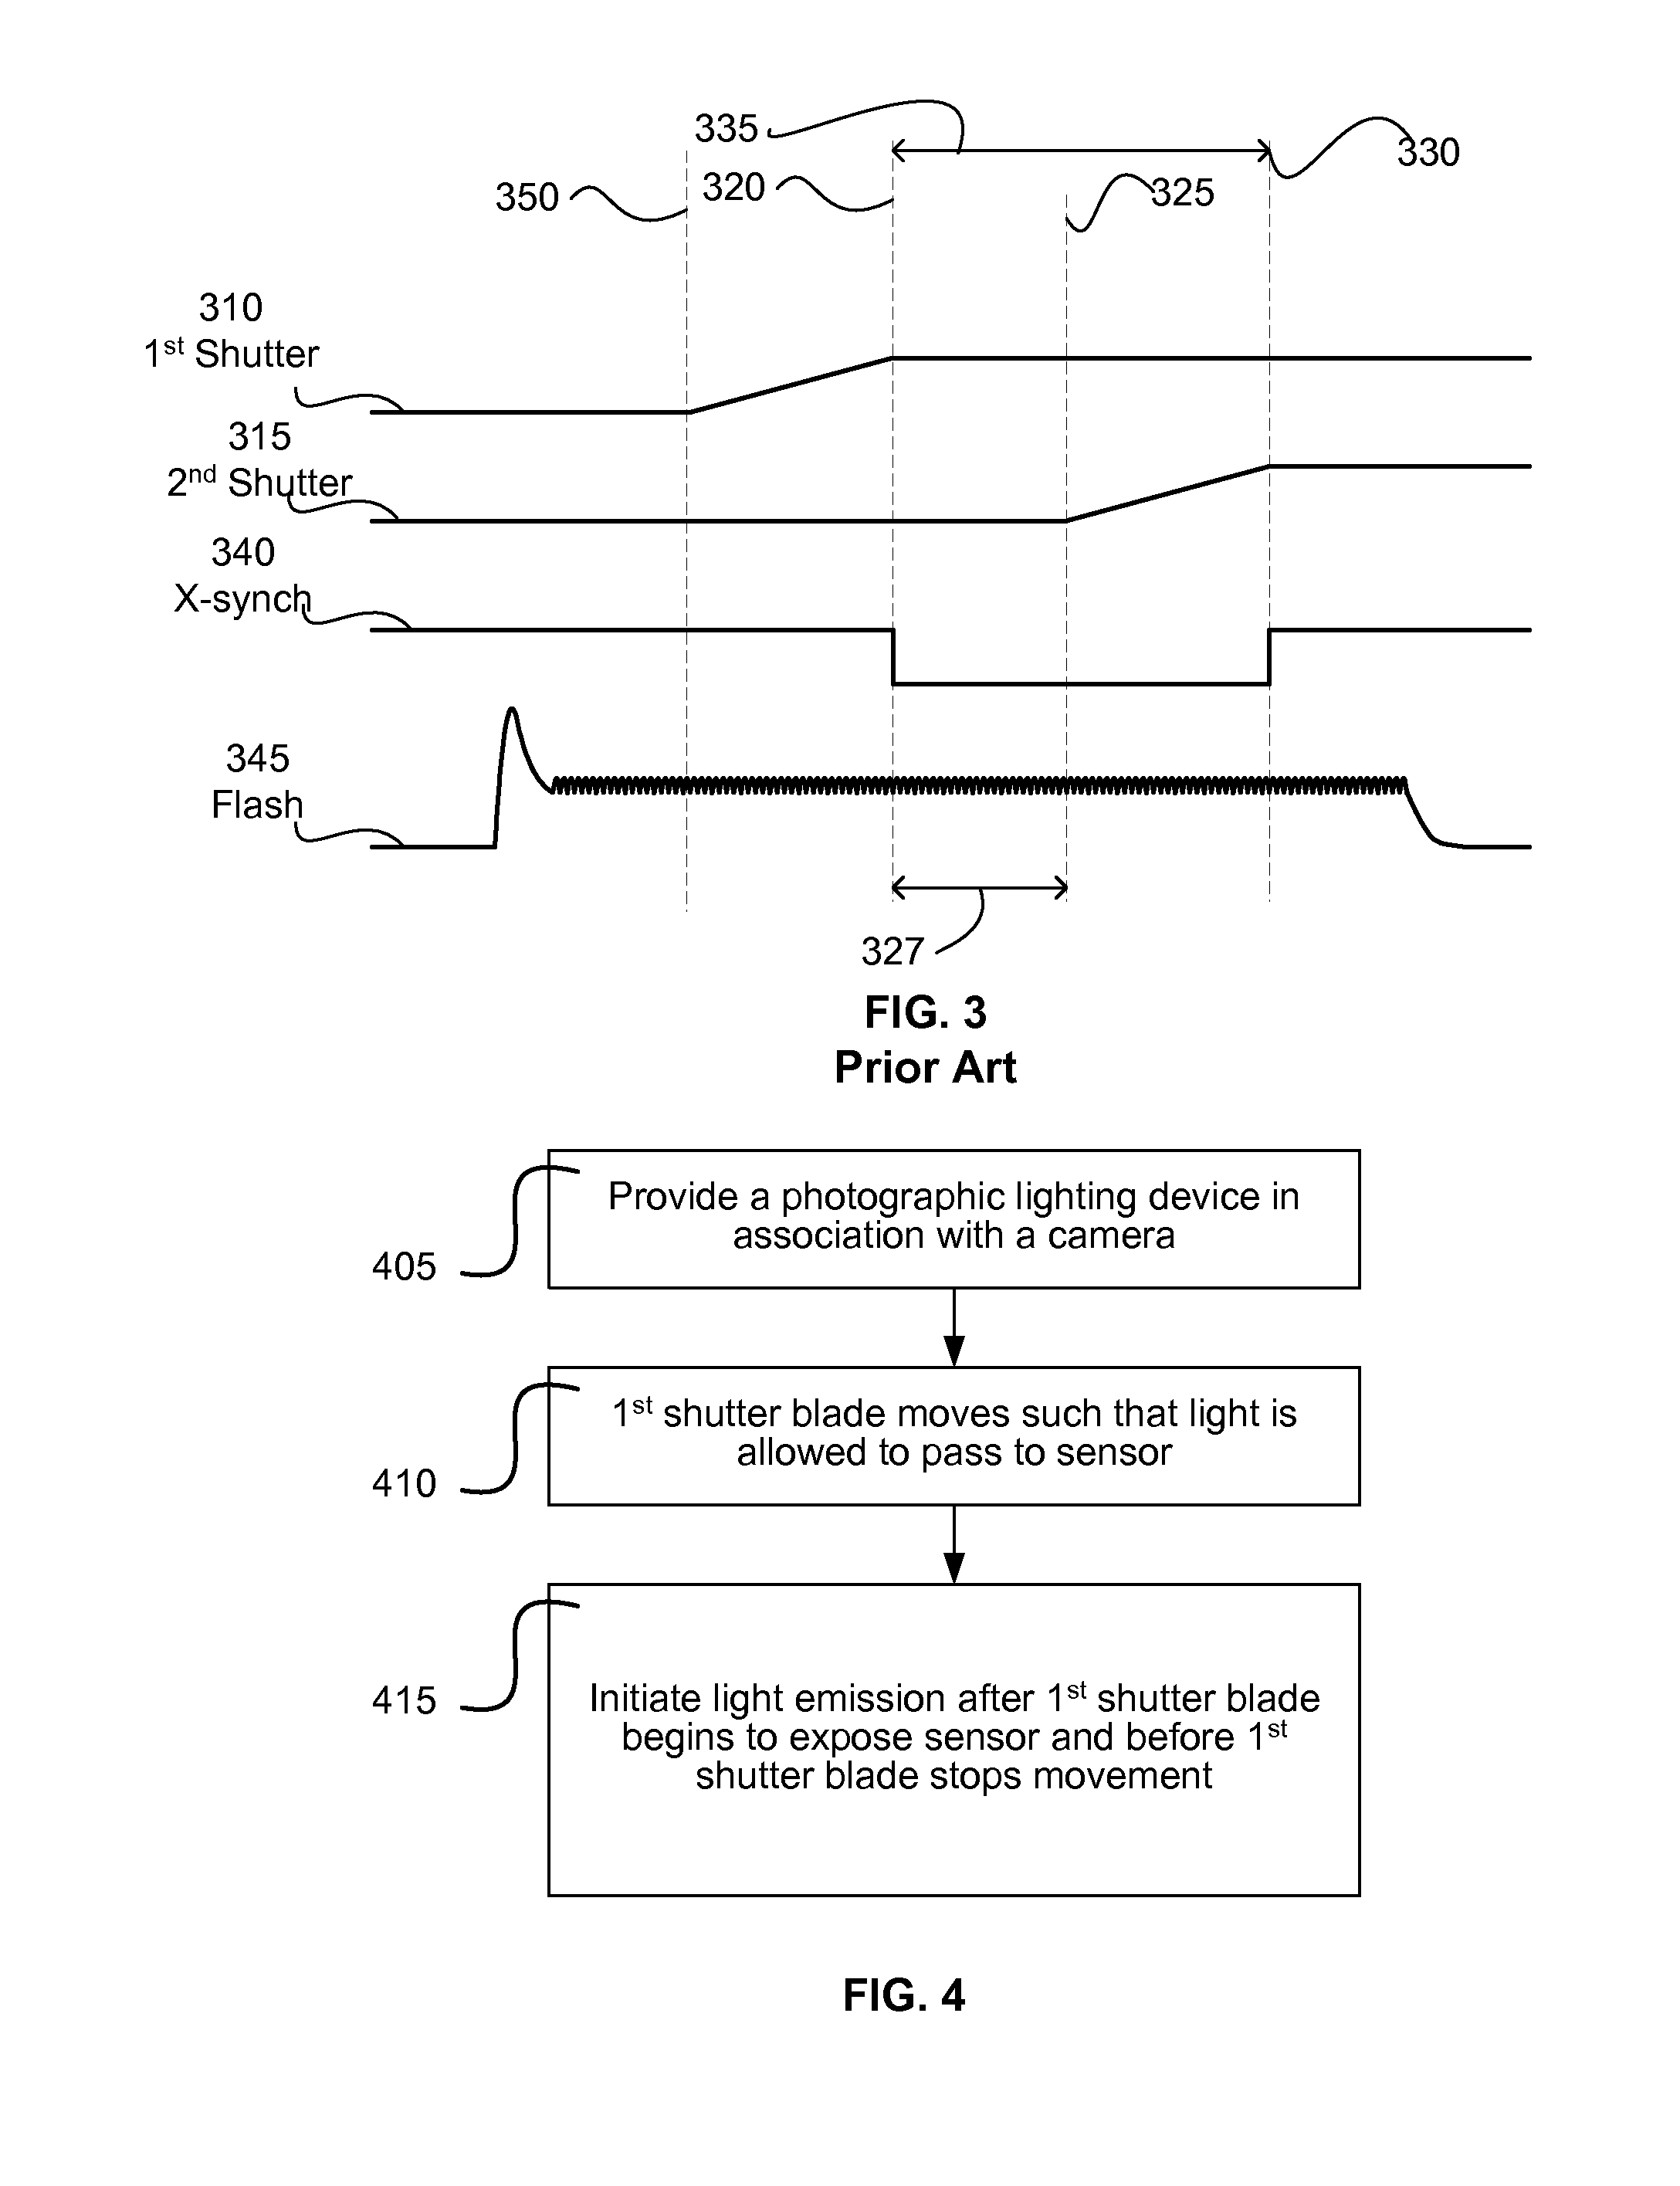 Early Photographic Synchronization System and Method